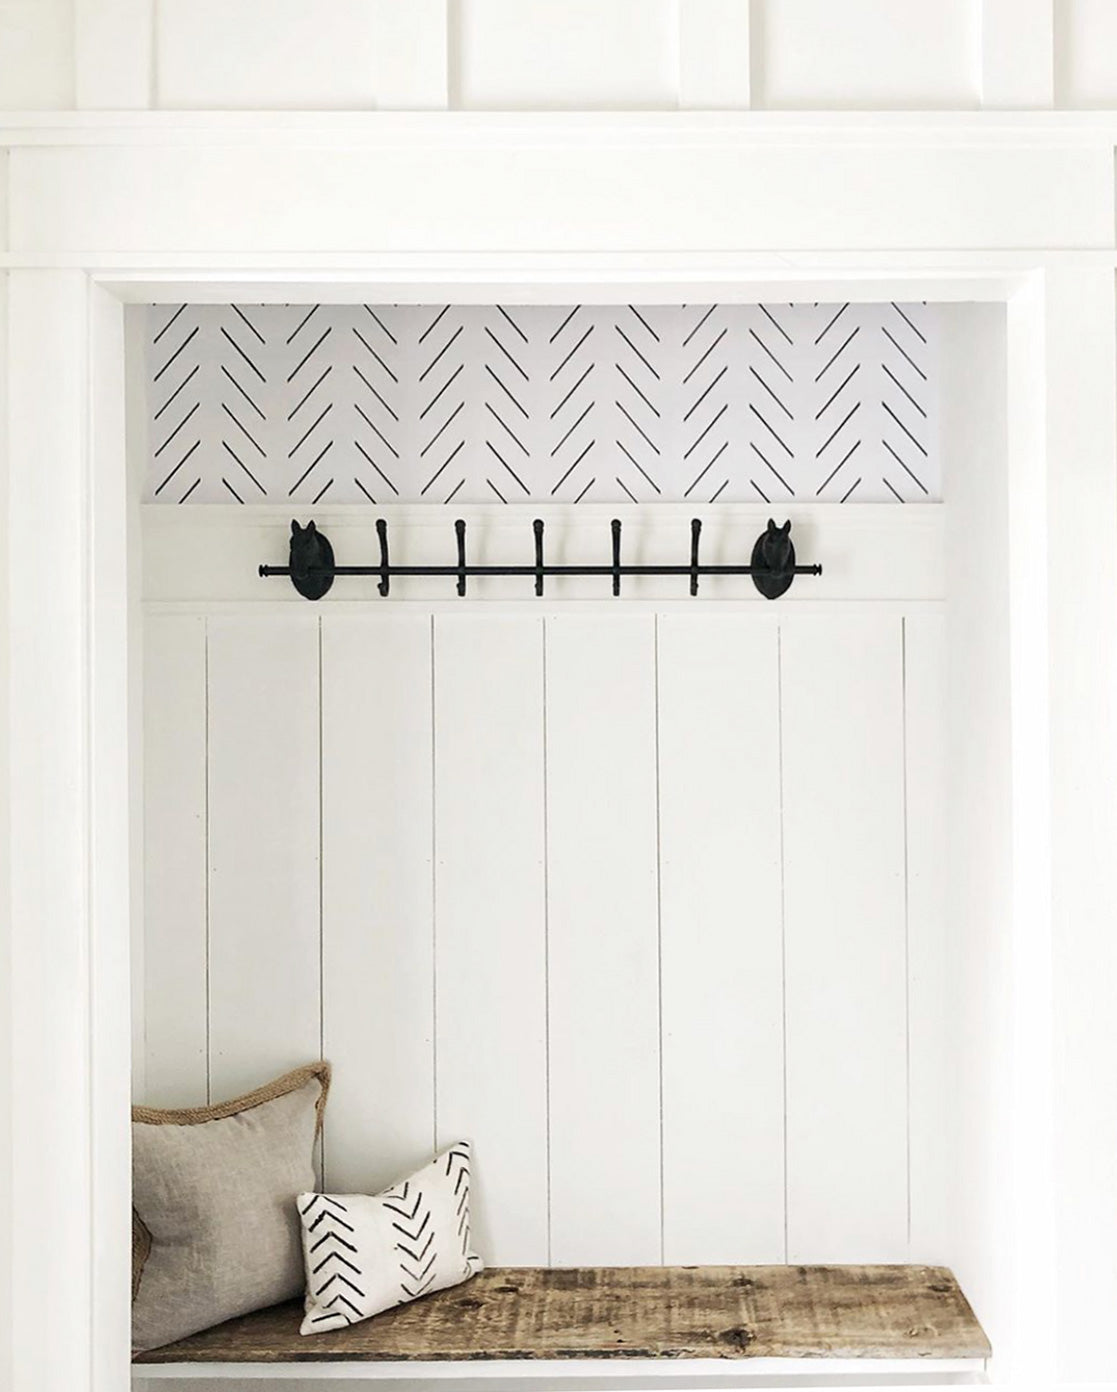 DIY wallpaper project for wallpapered closet nook